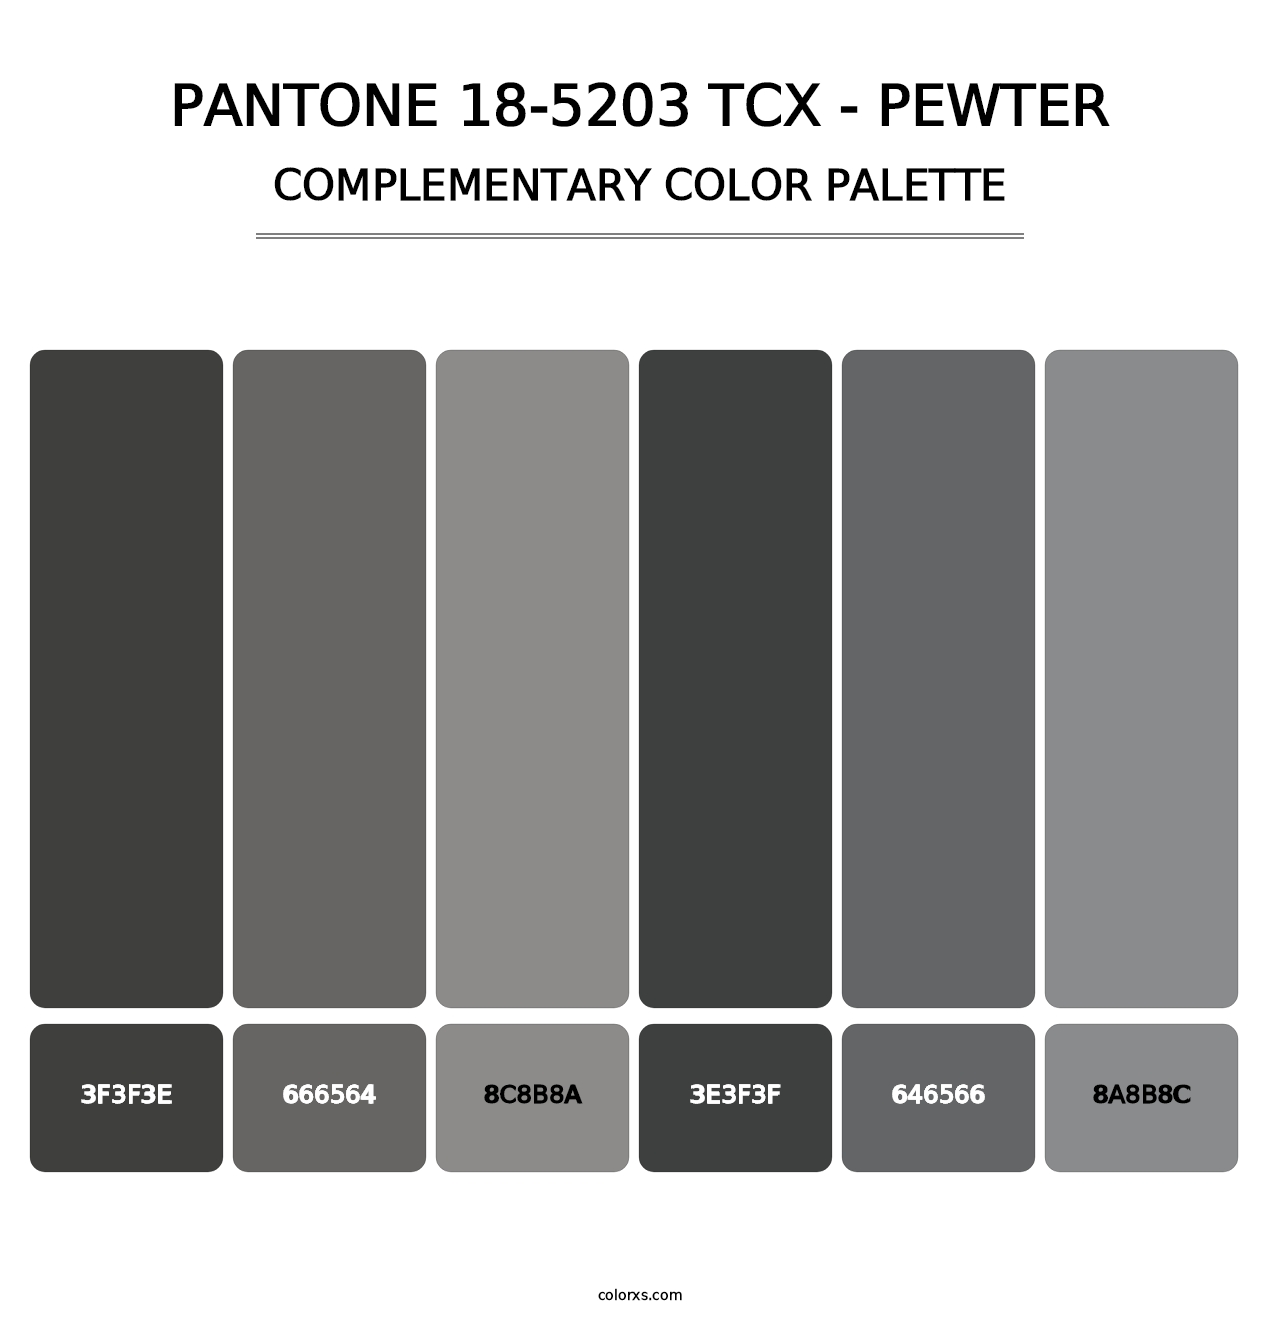 PANTONE 18-5203 TCX - Pewter - Complementary Color Palette